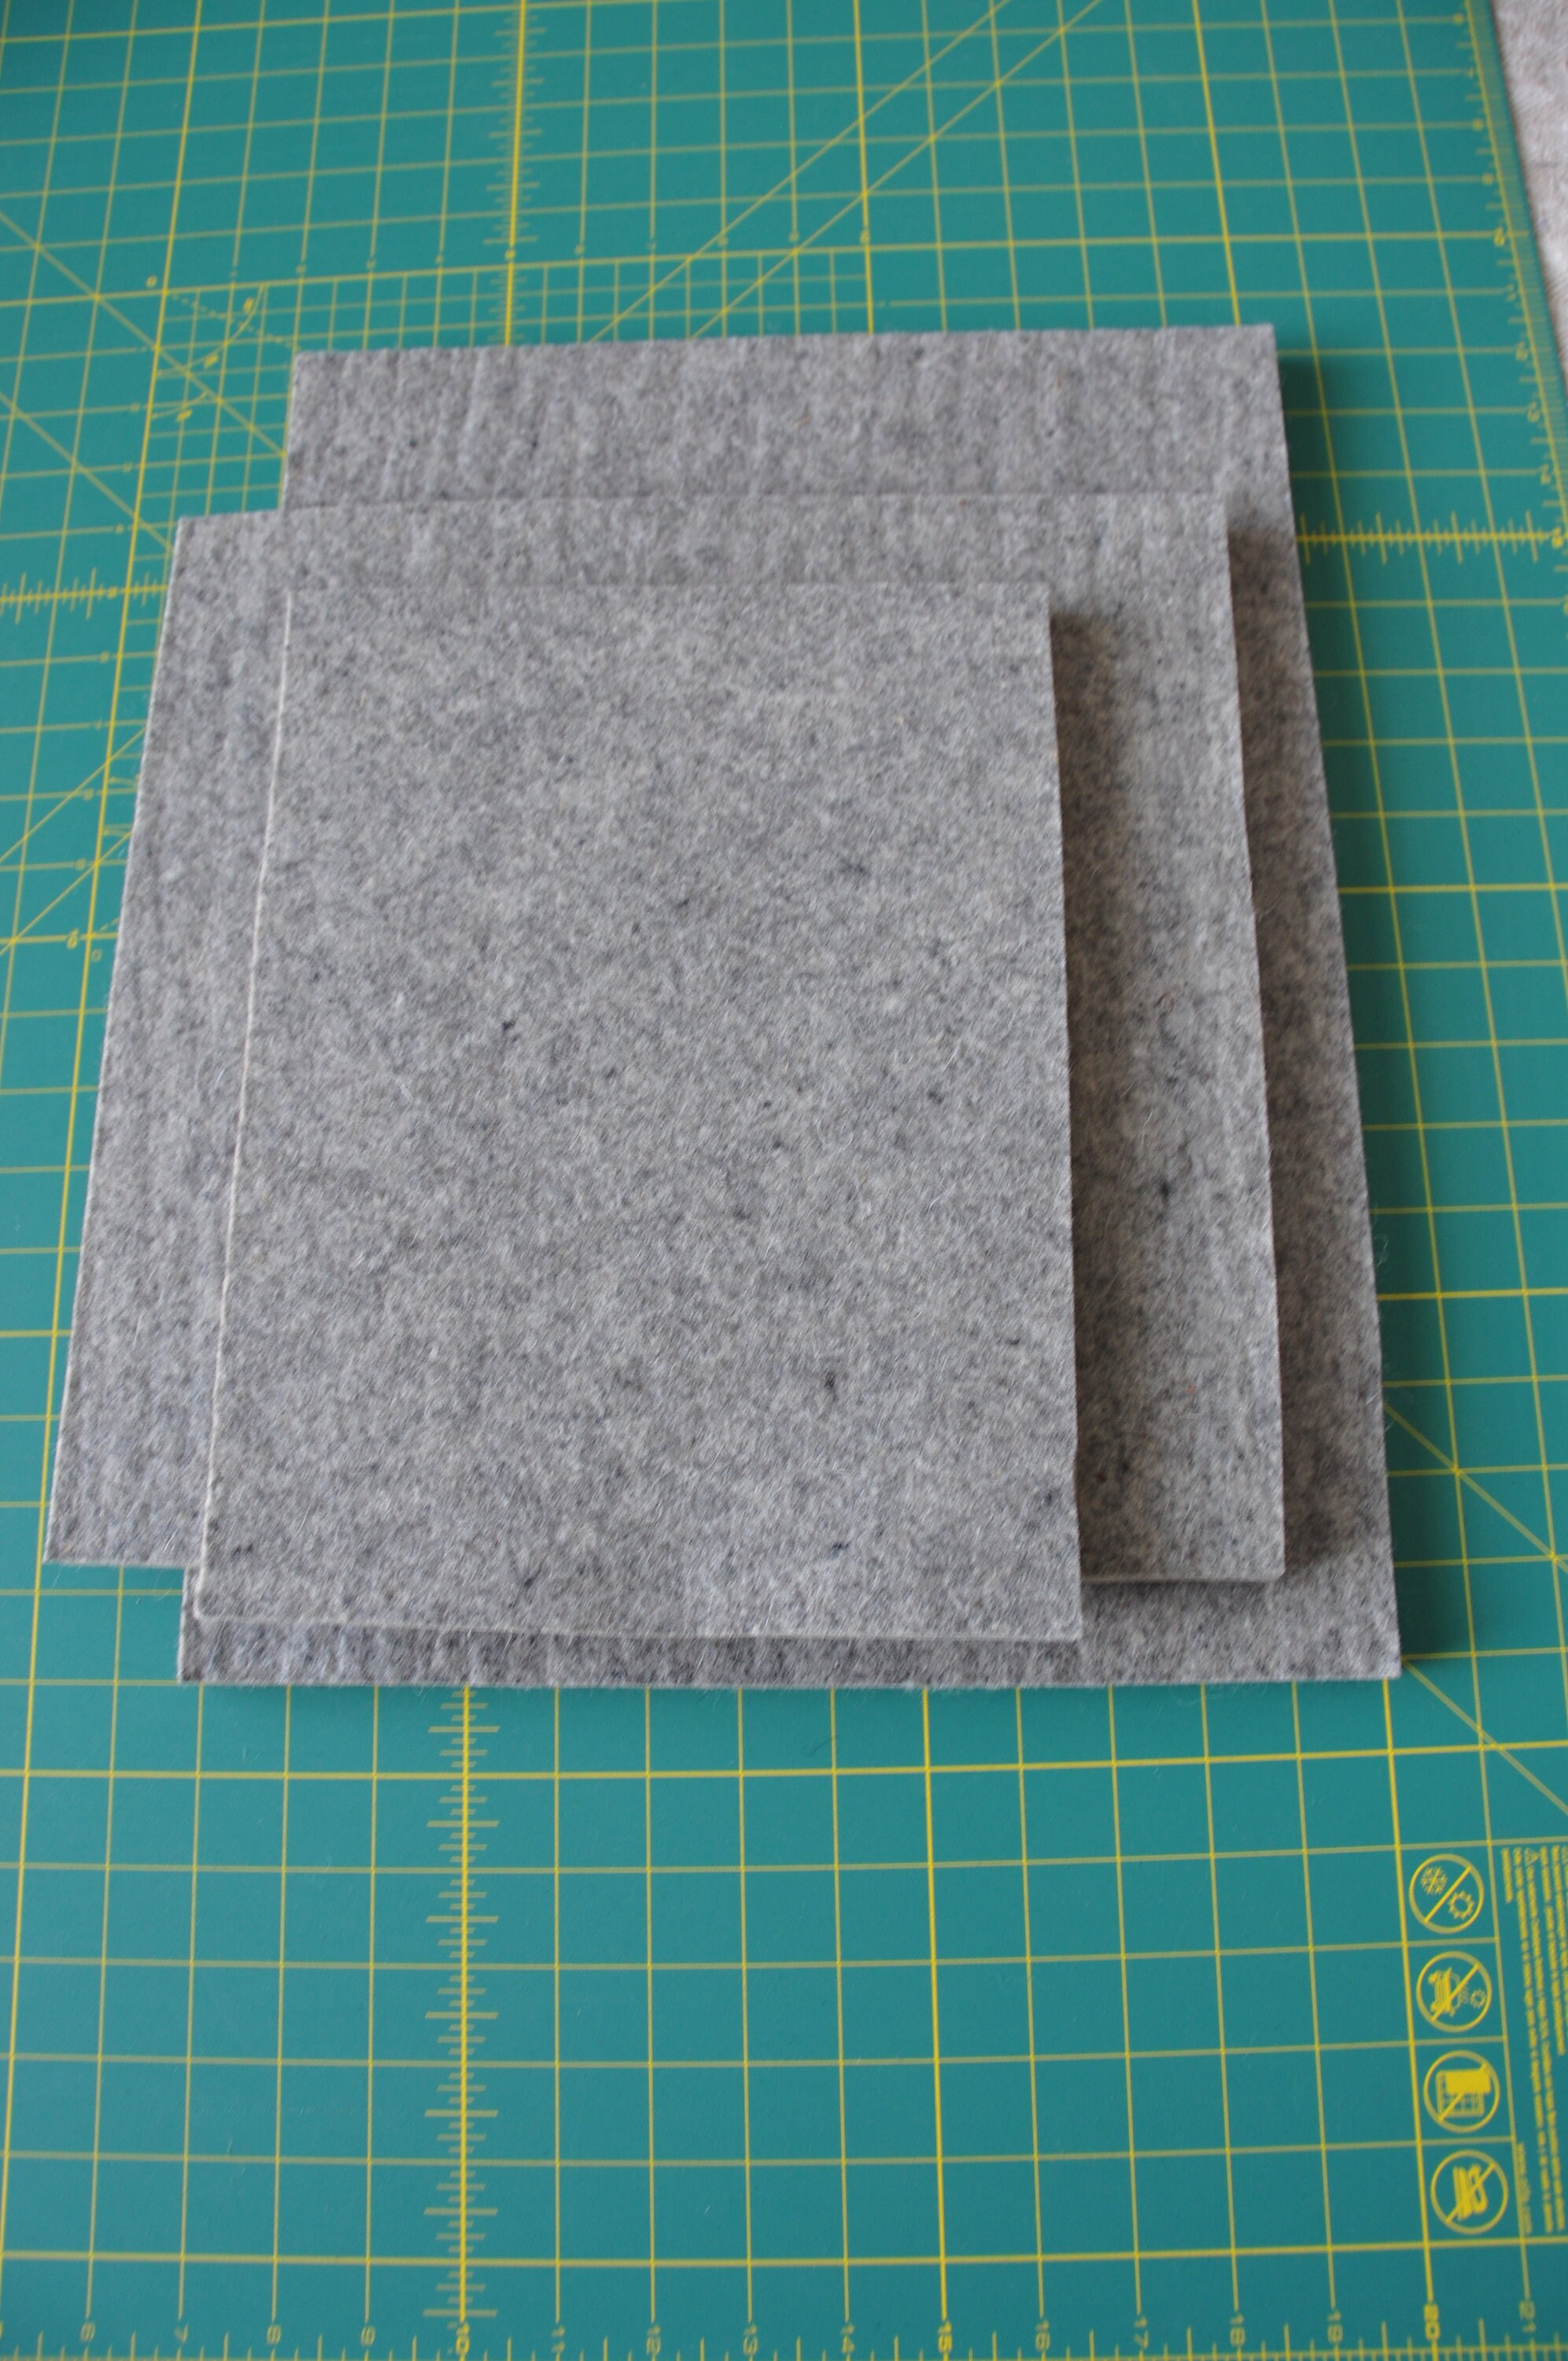  17''x13.5'' Wool Pressing Mat for Quilting, 100% Wool